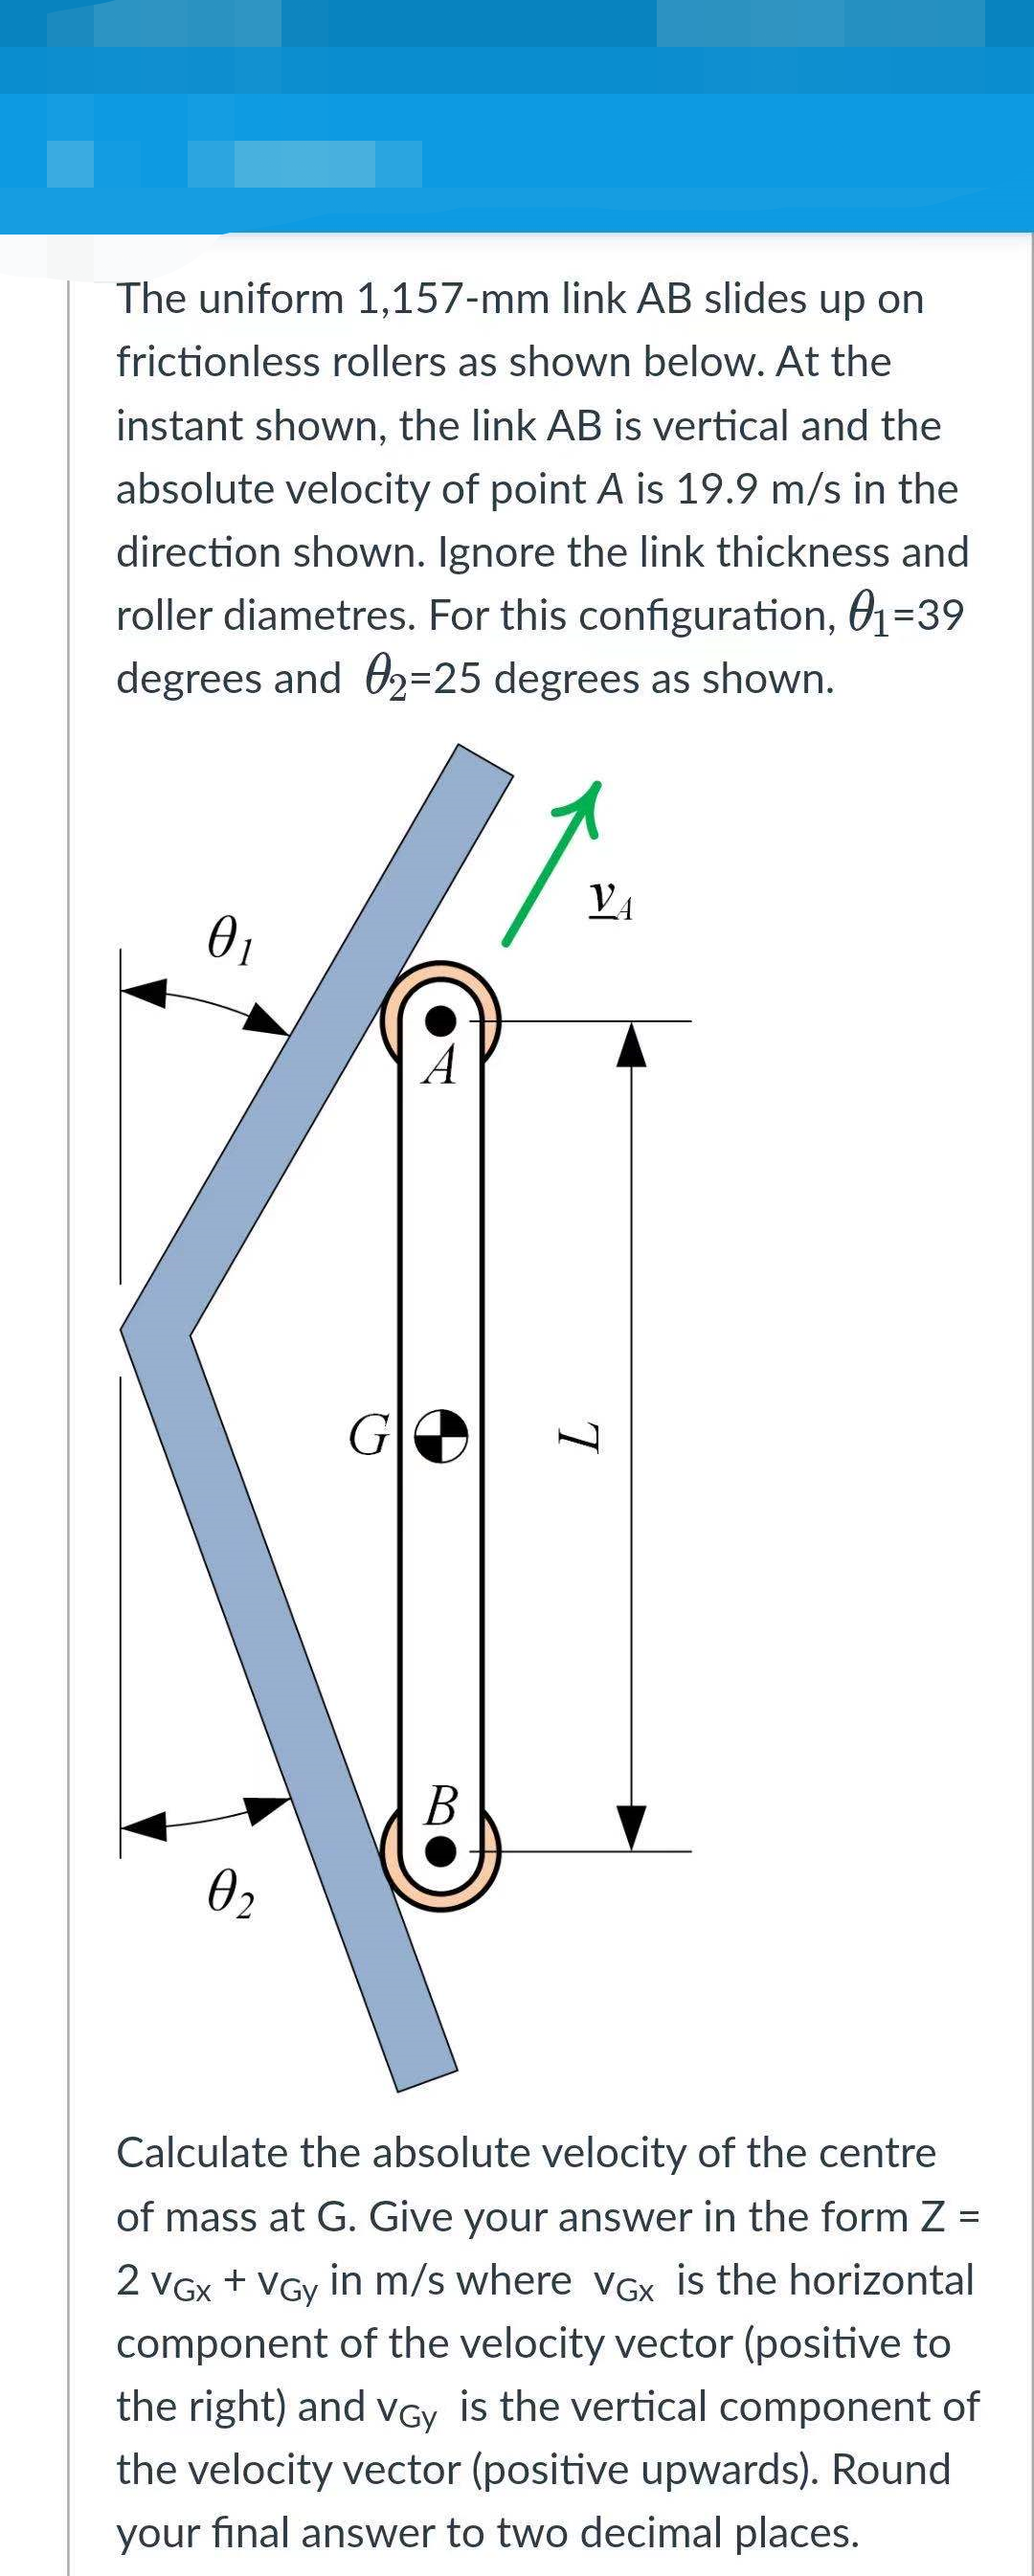 The uniform 1,157-mm link AB slides up on
frictionless rollers as shown below. At the
instant shown, the link AB is vertical and the
absolute velocity of point A is 19.9 m/s in the
direction shown. Ignore the link thickness and
roller diametres. For this configuration, 01=39
degrees and O2=25 degrees as shown.
VA
01
A
G
Calculate the absolute velocity of the centre
of mass at G. Give your answer in the form Z =
2 VGx + VGy in m/s where vGx is the horizontal
component of the velocity vector (positive to
the right) and VGy is the vertical component of
the velocity vector (positive upwards). Round
your final answer to two decimal places.
